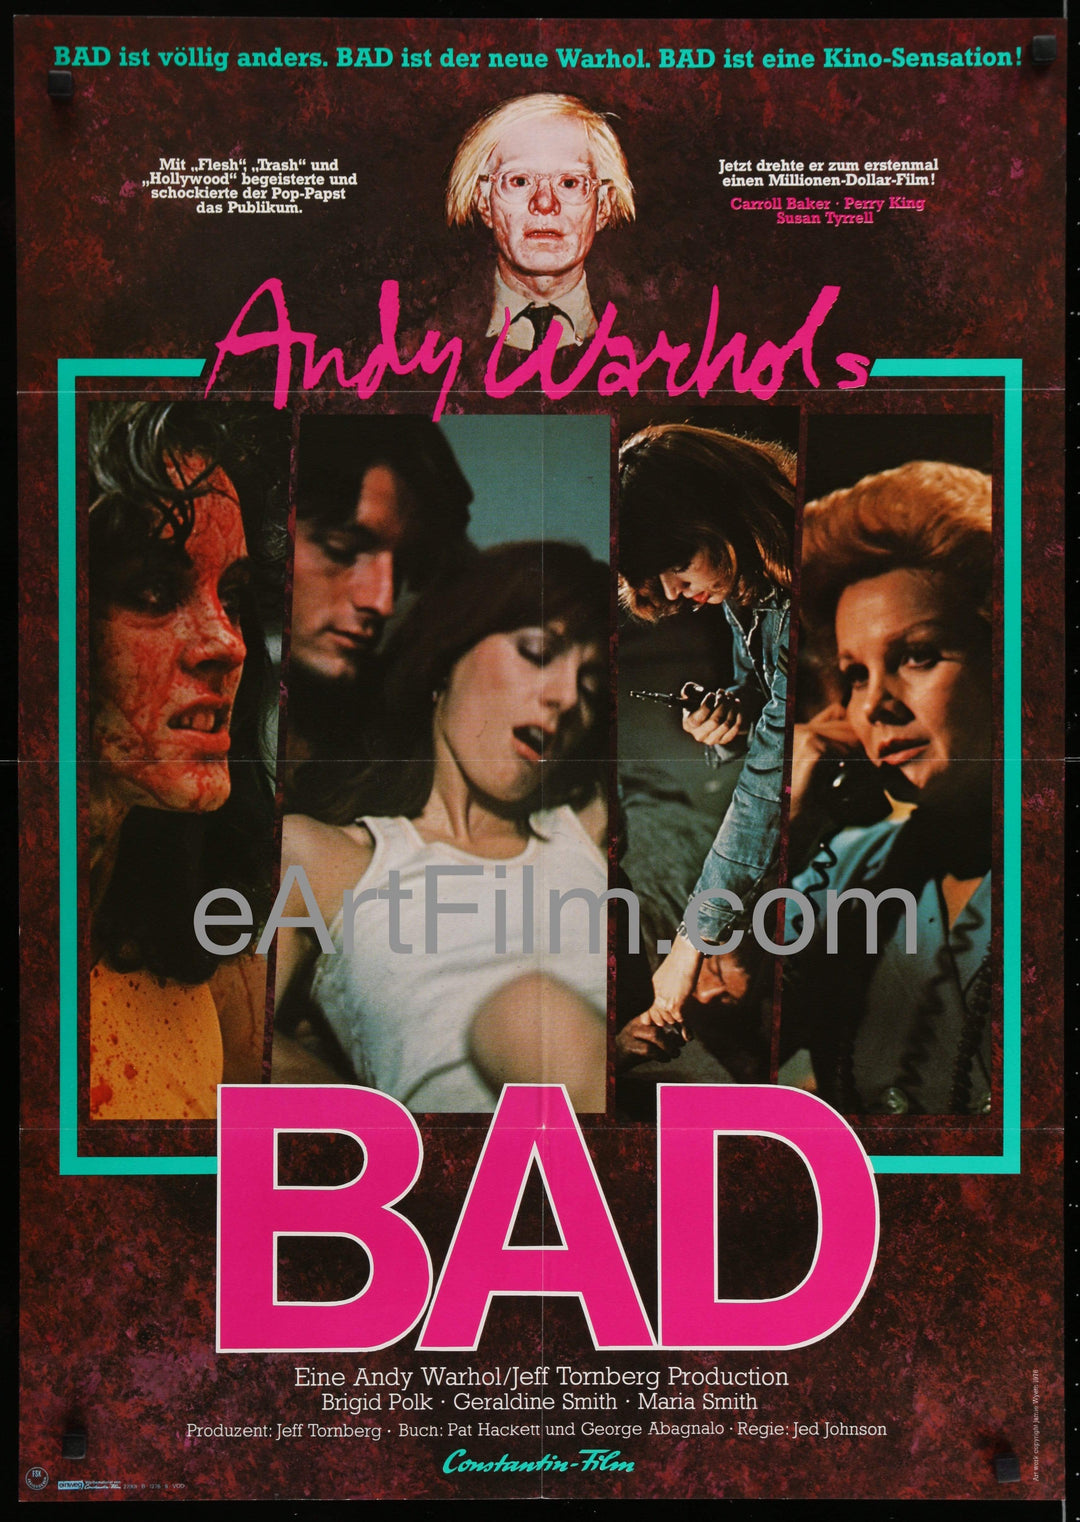 eArtFilm.com German "A1" Movie Poster (23"x33") Andy Warhol's Bad-Perry King-Carroll Baker-female assassins-1977-23X33